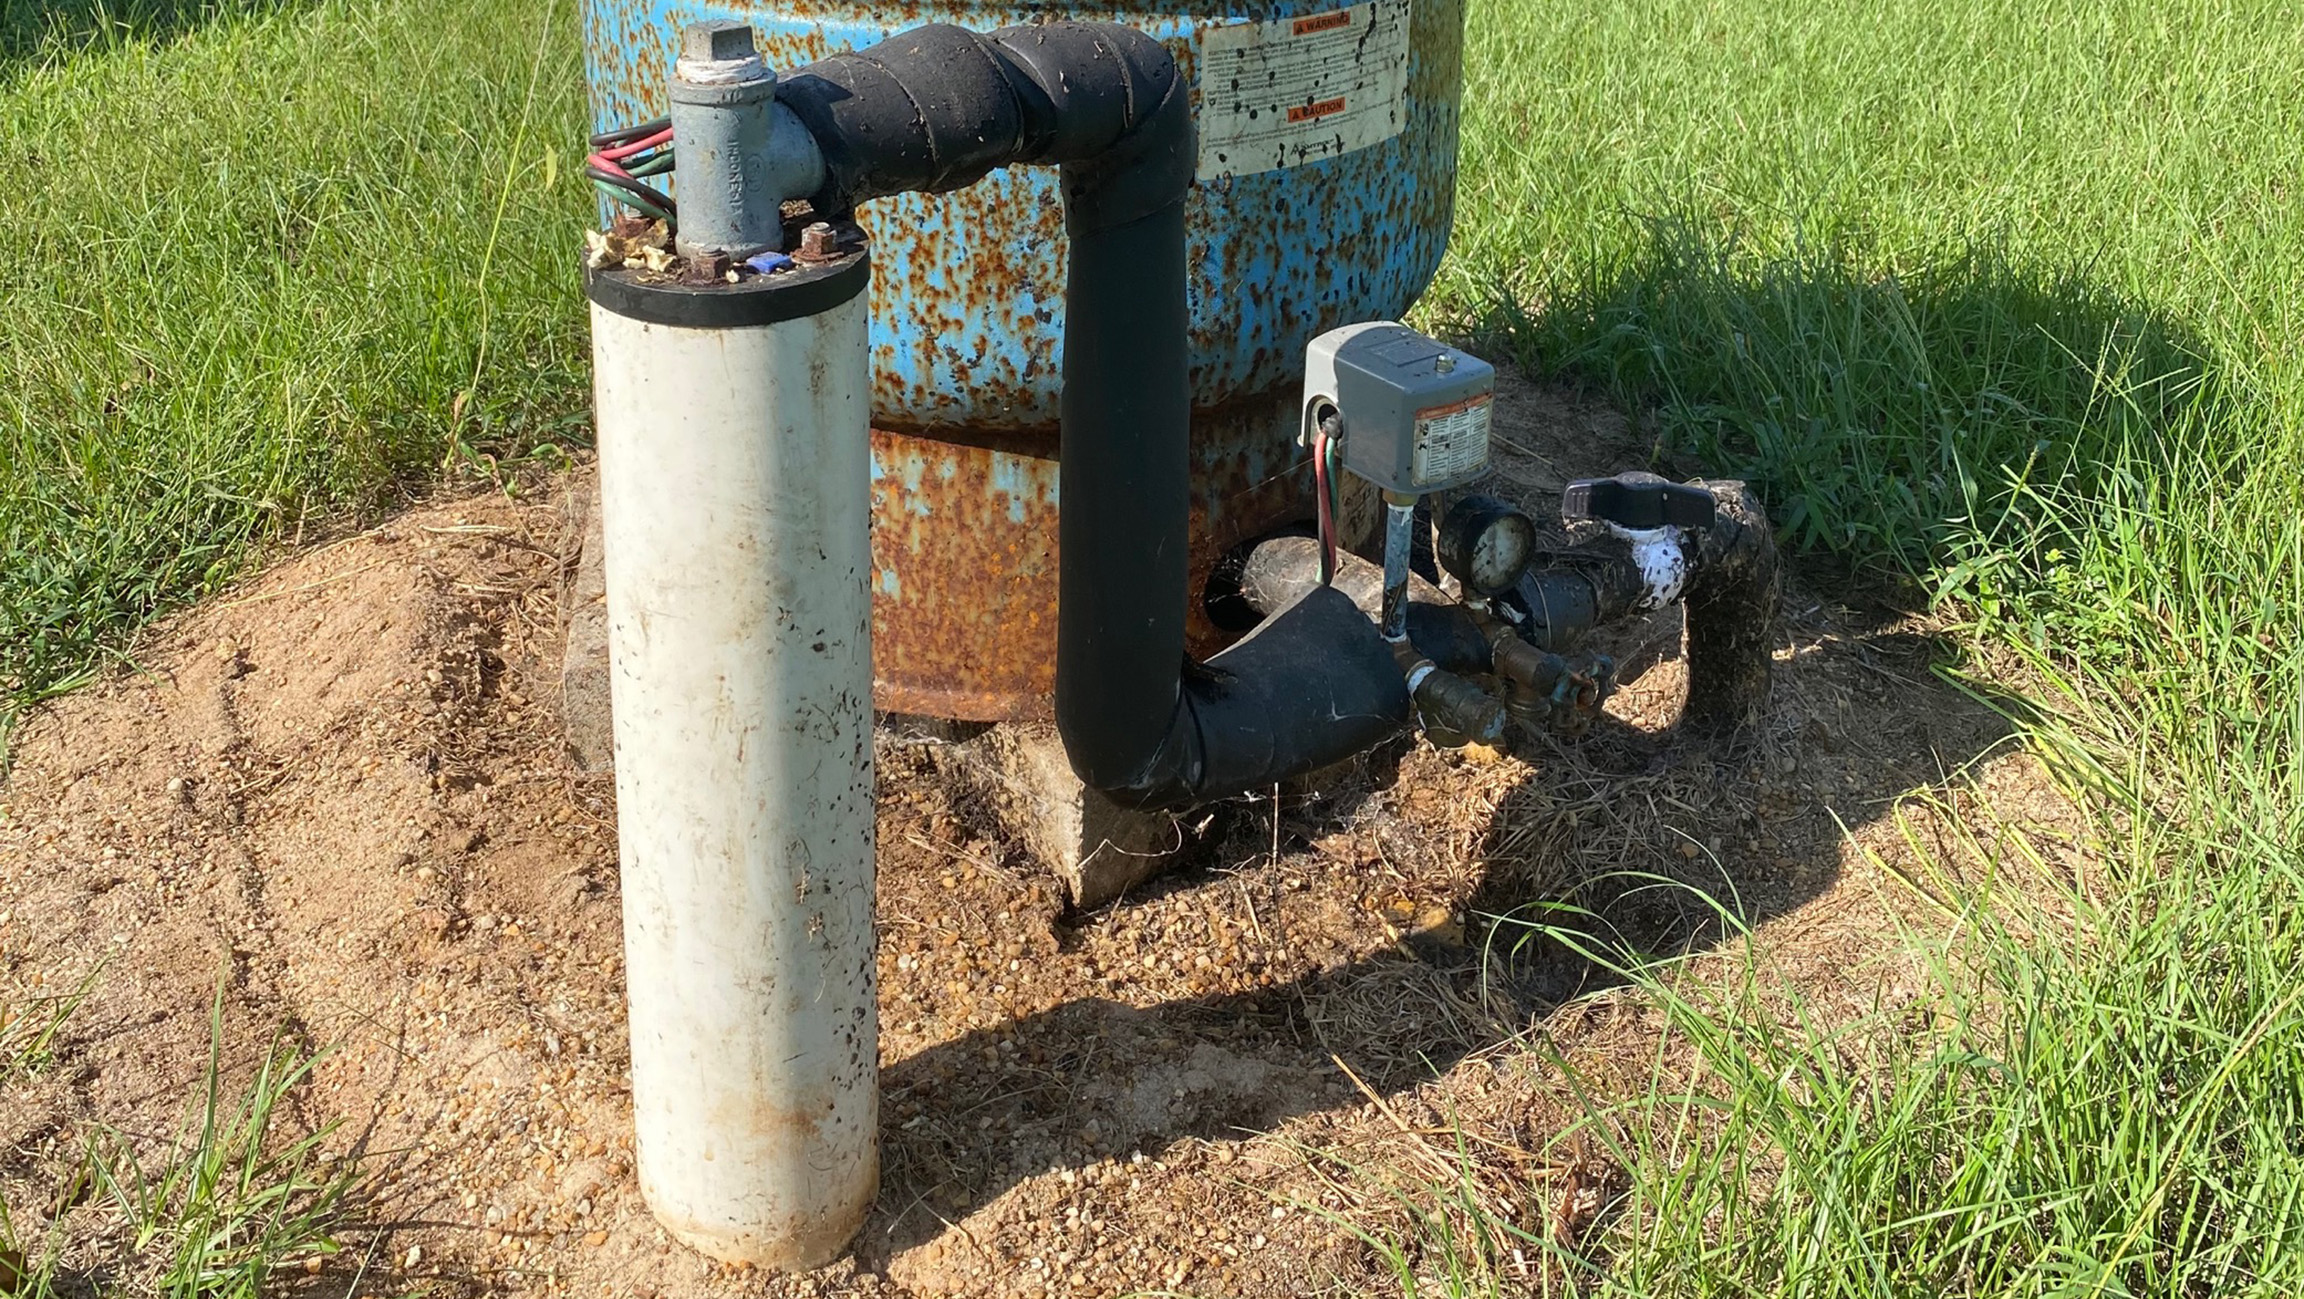 Private Well at a Home Site